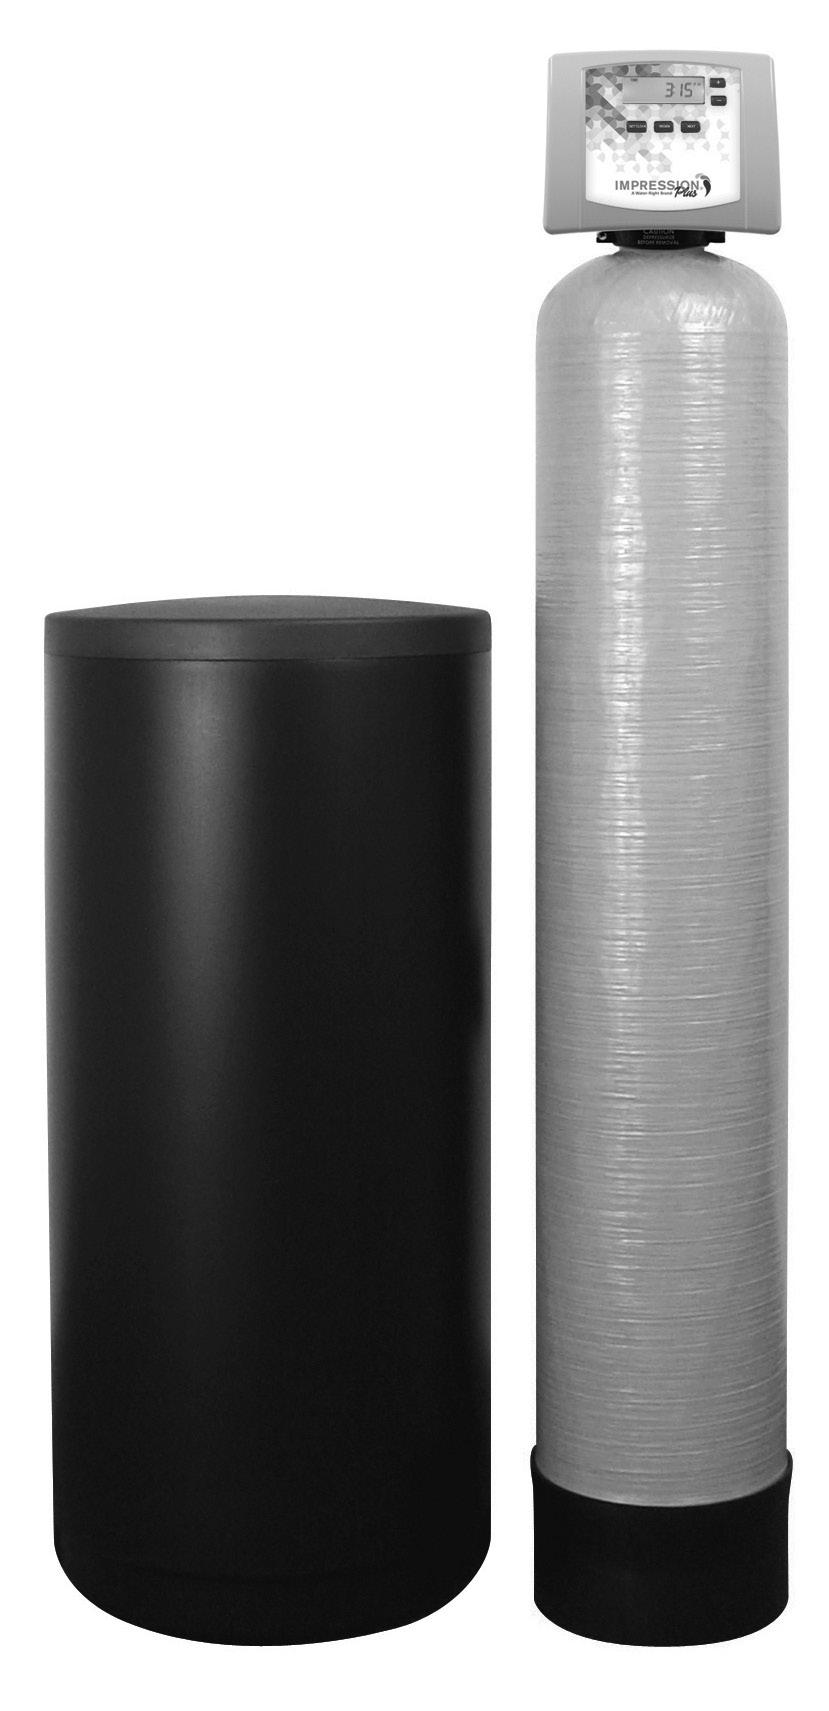 Impression Plus Series Metered Water Softeners For Certified Models: IMP-8